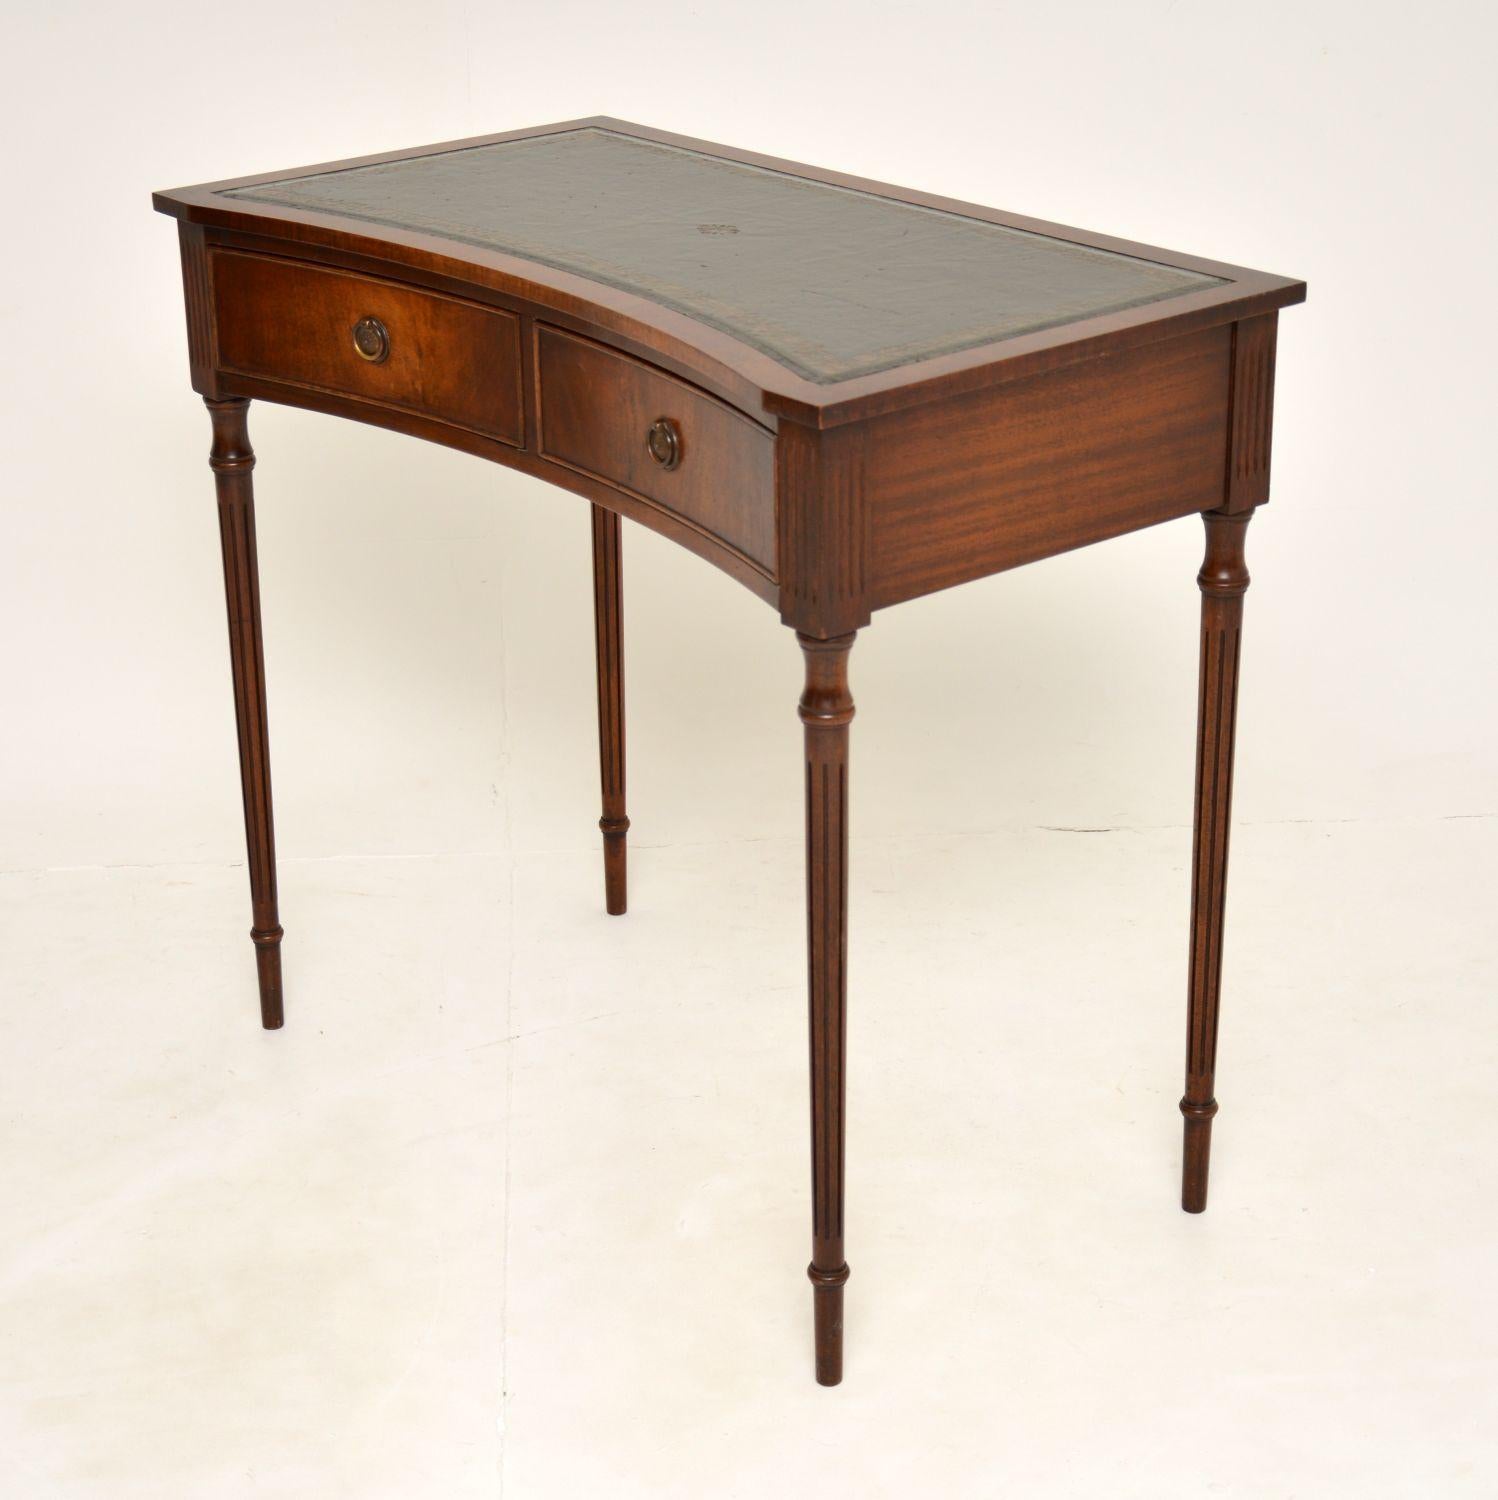 Regency Antique Leather Top Writing Table / Desk